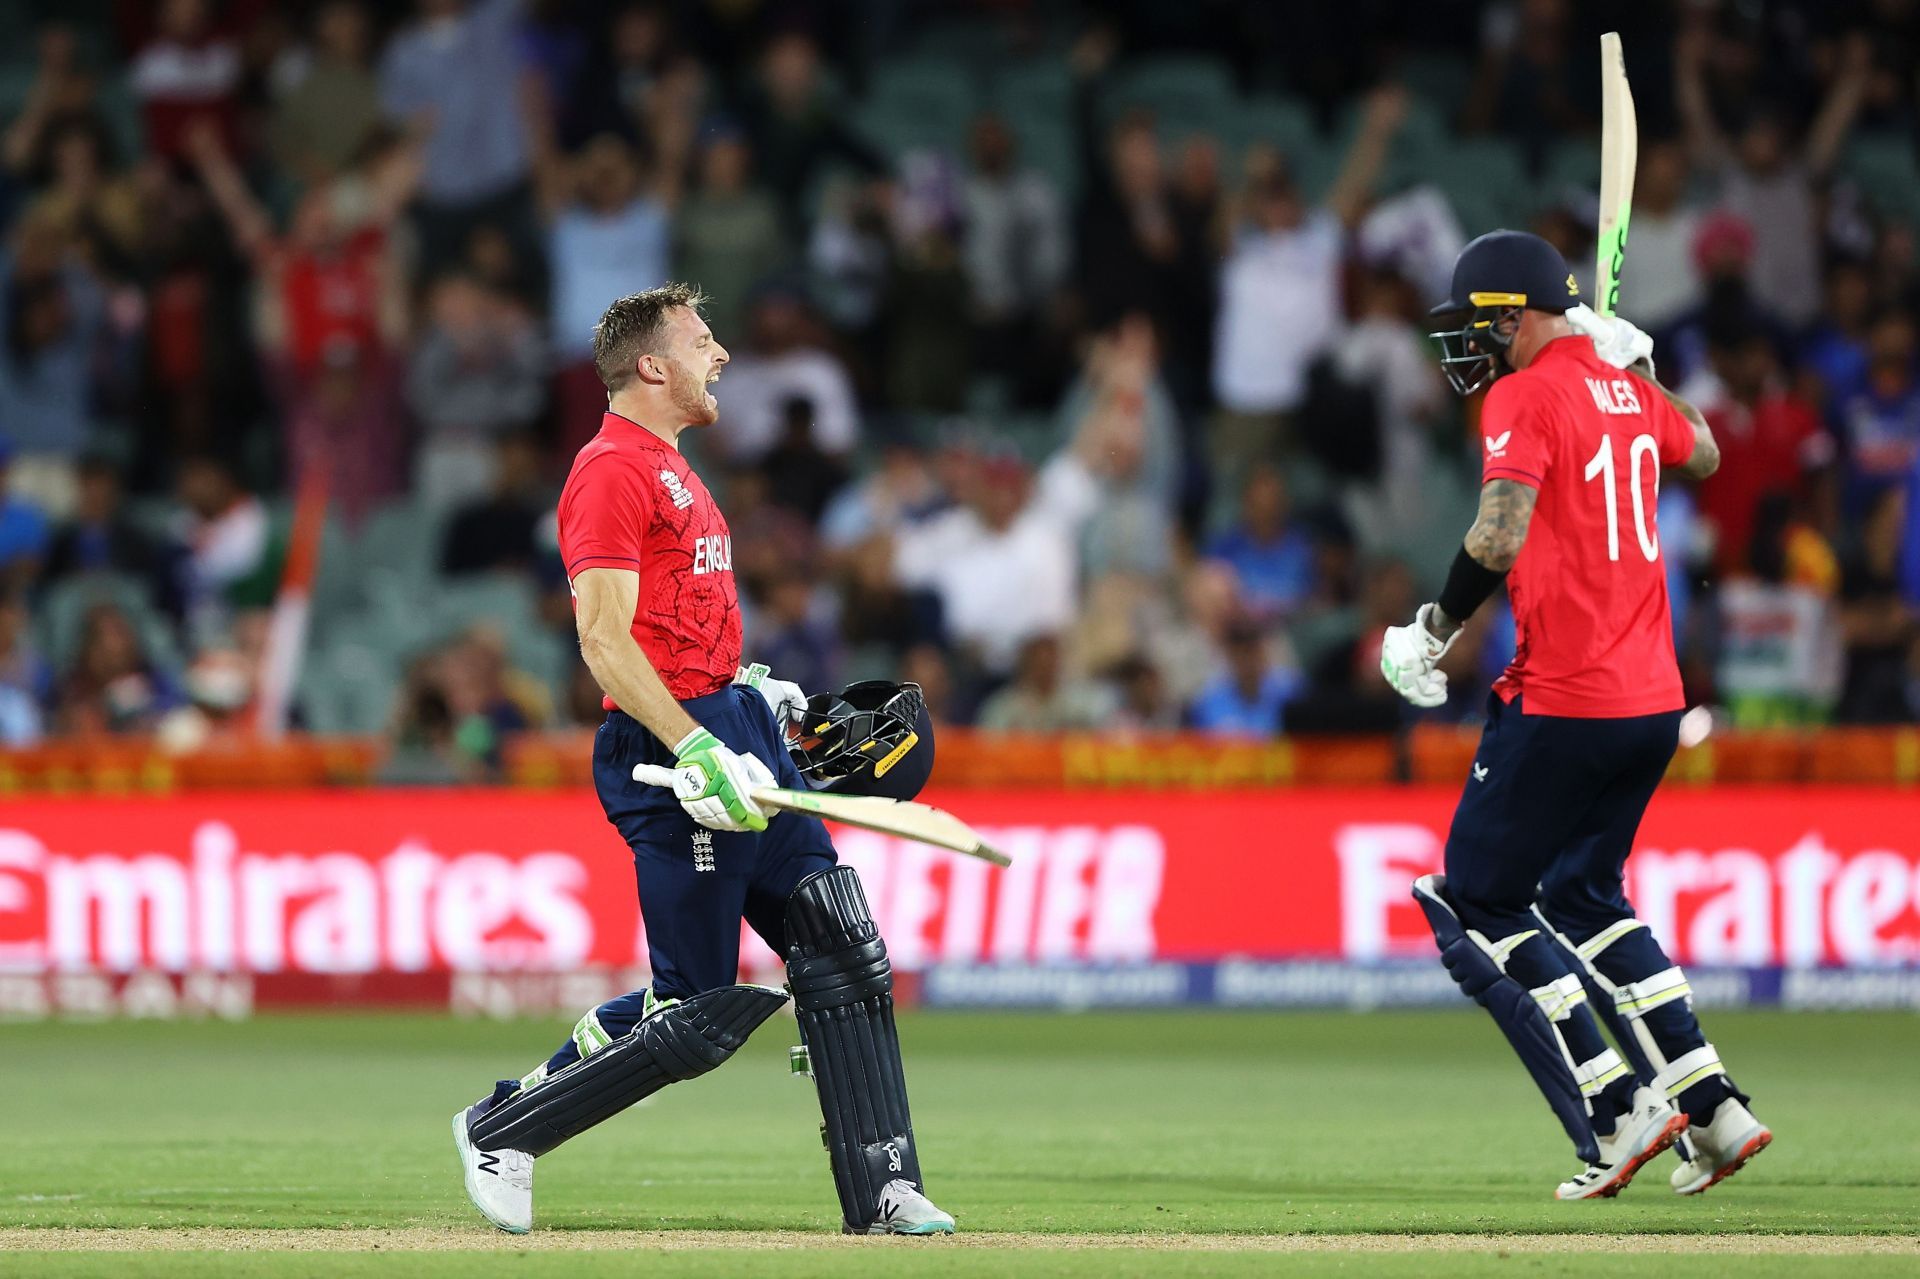 Jos Buttler and Alex Hales are pumped after a dominant win. (Credits: Getty)